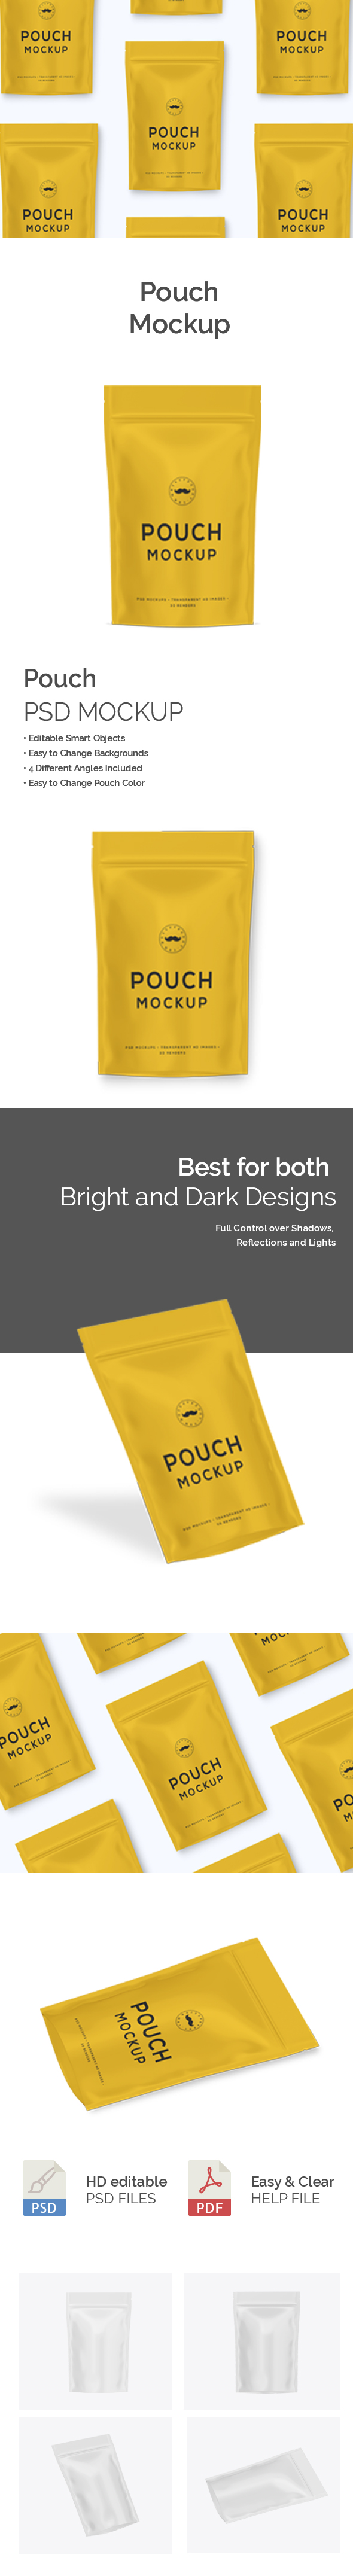 Yellow customizable packaging Pouch Psd Mockup on white background.